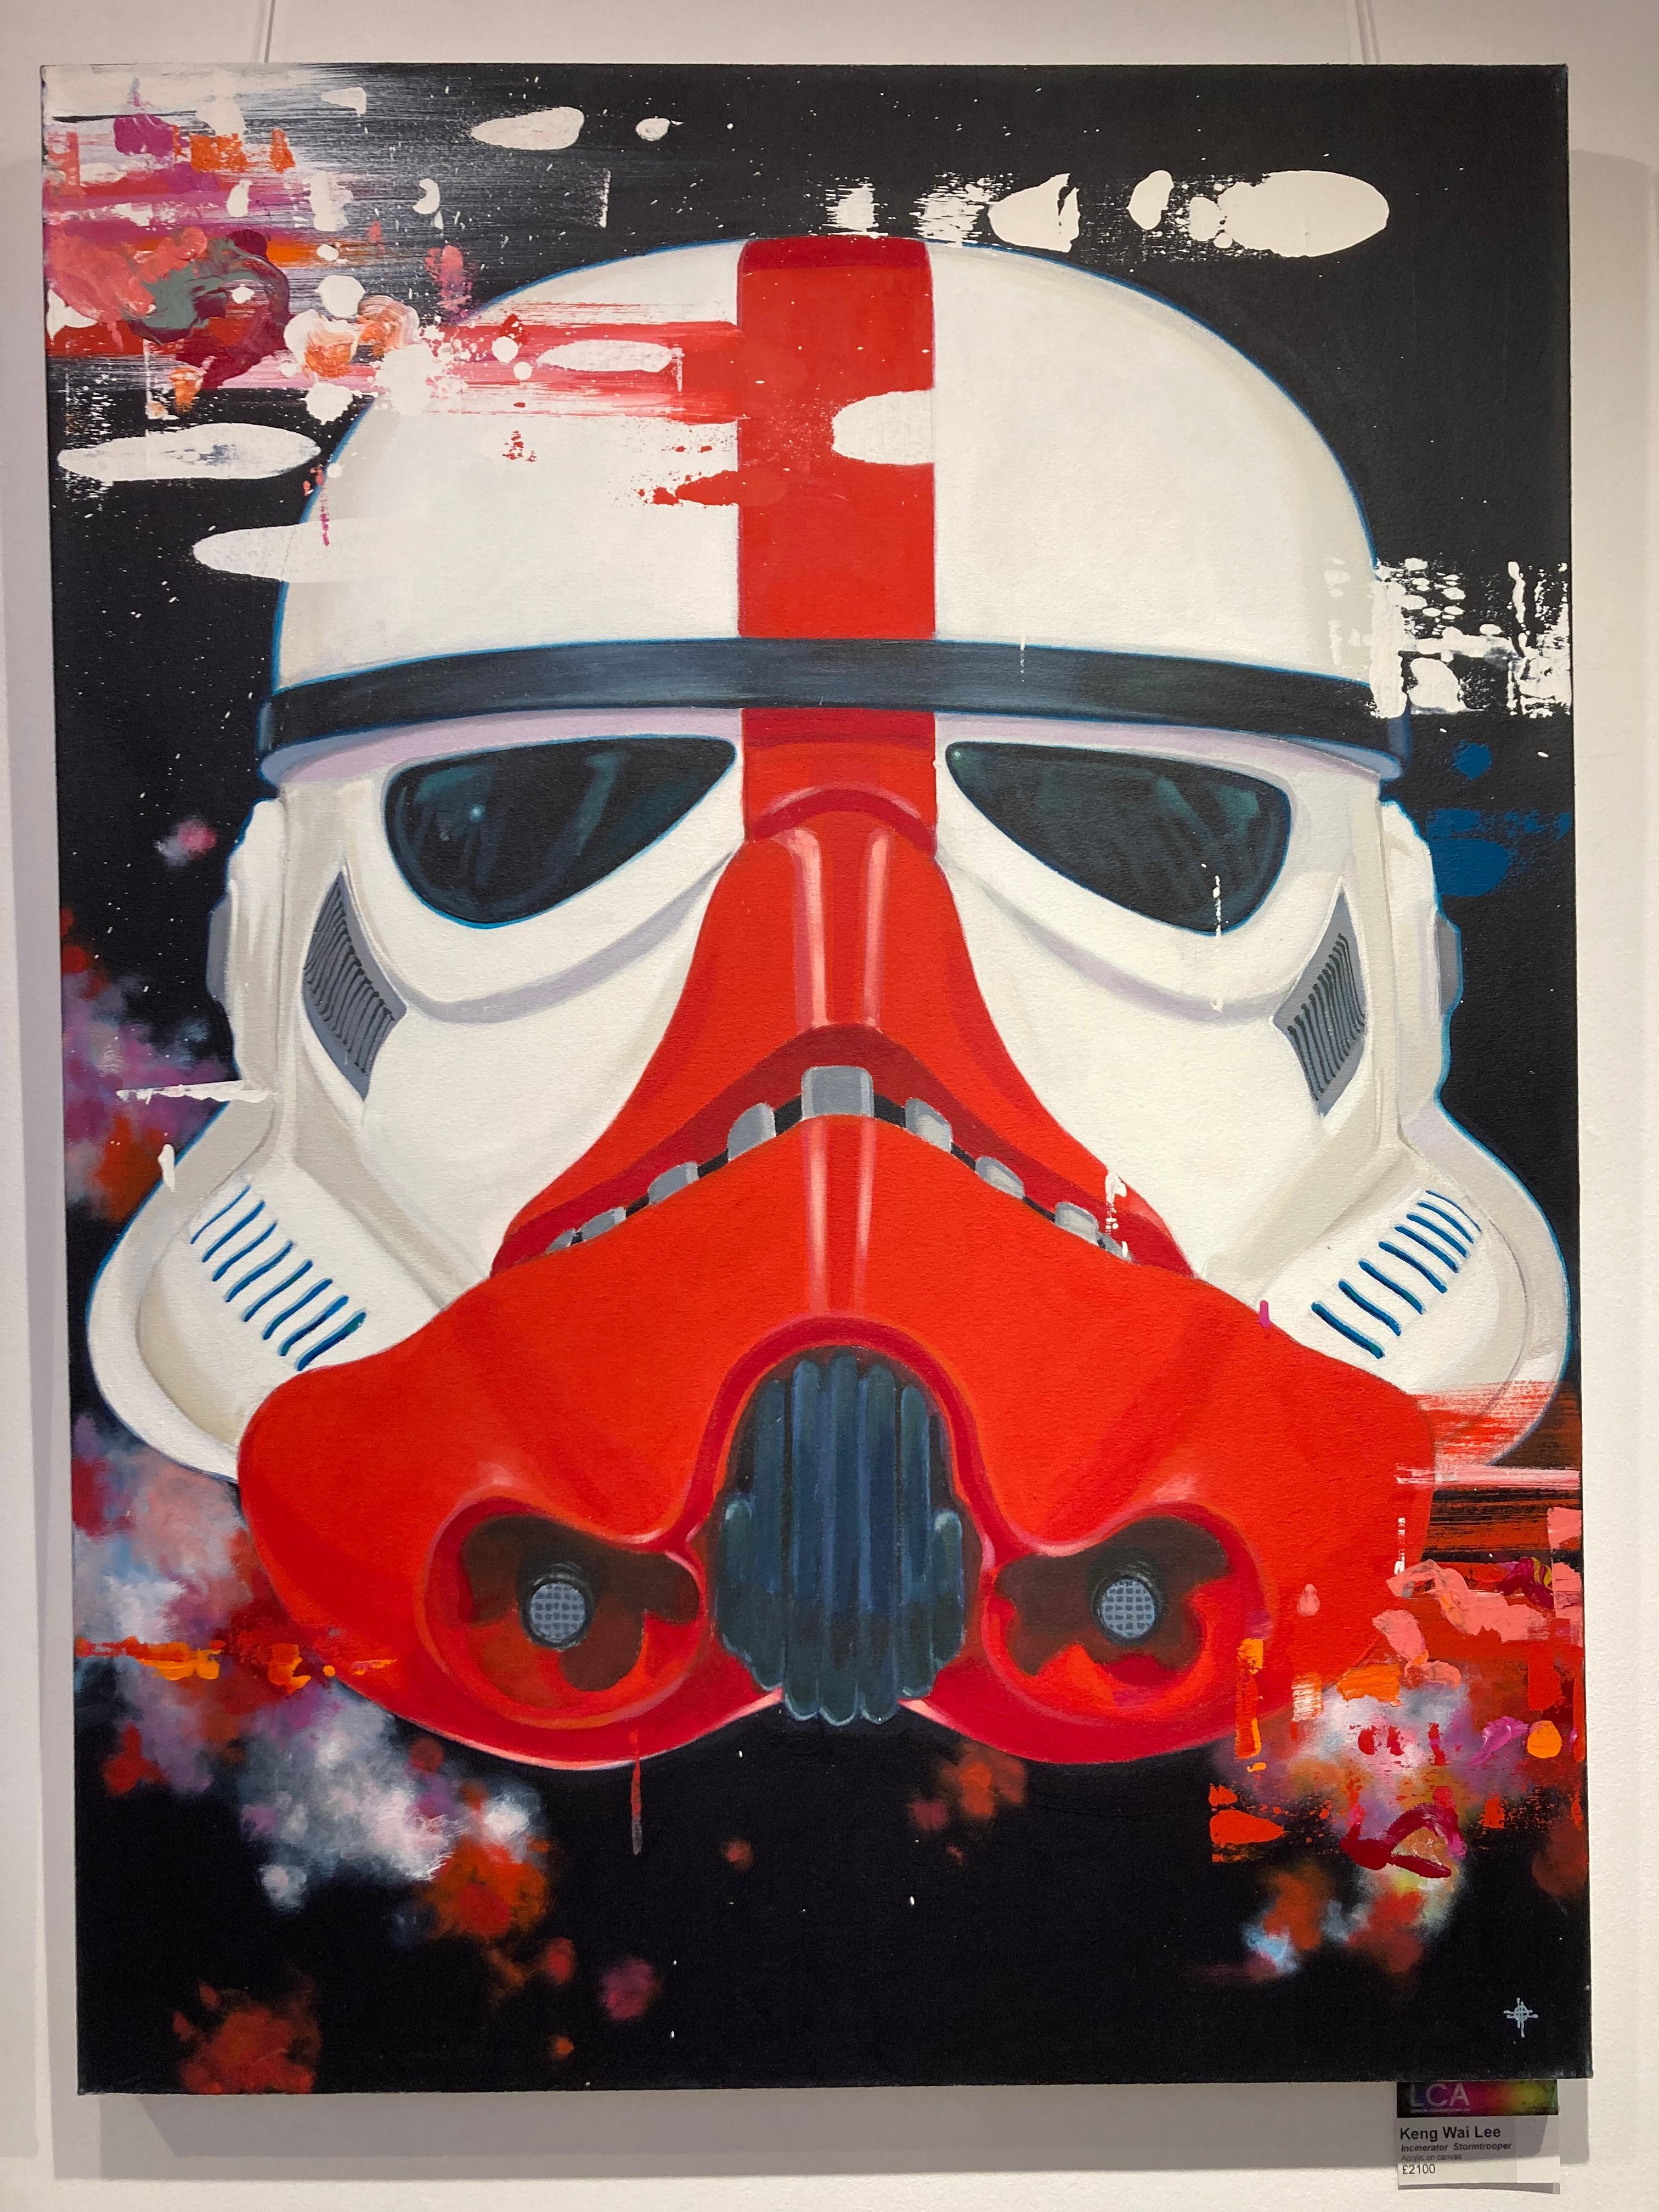 Incinerator Stormtrooper - contemporary Star Wars sci-fi acrylic painting - Painting by Keng Wai Lee